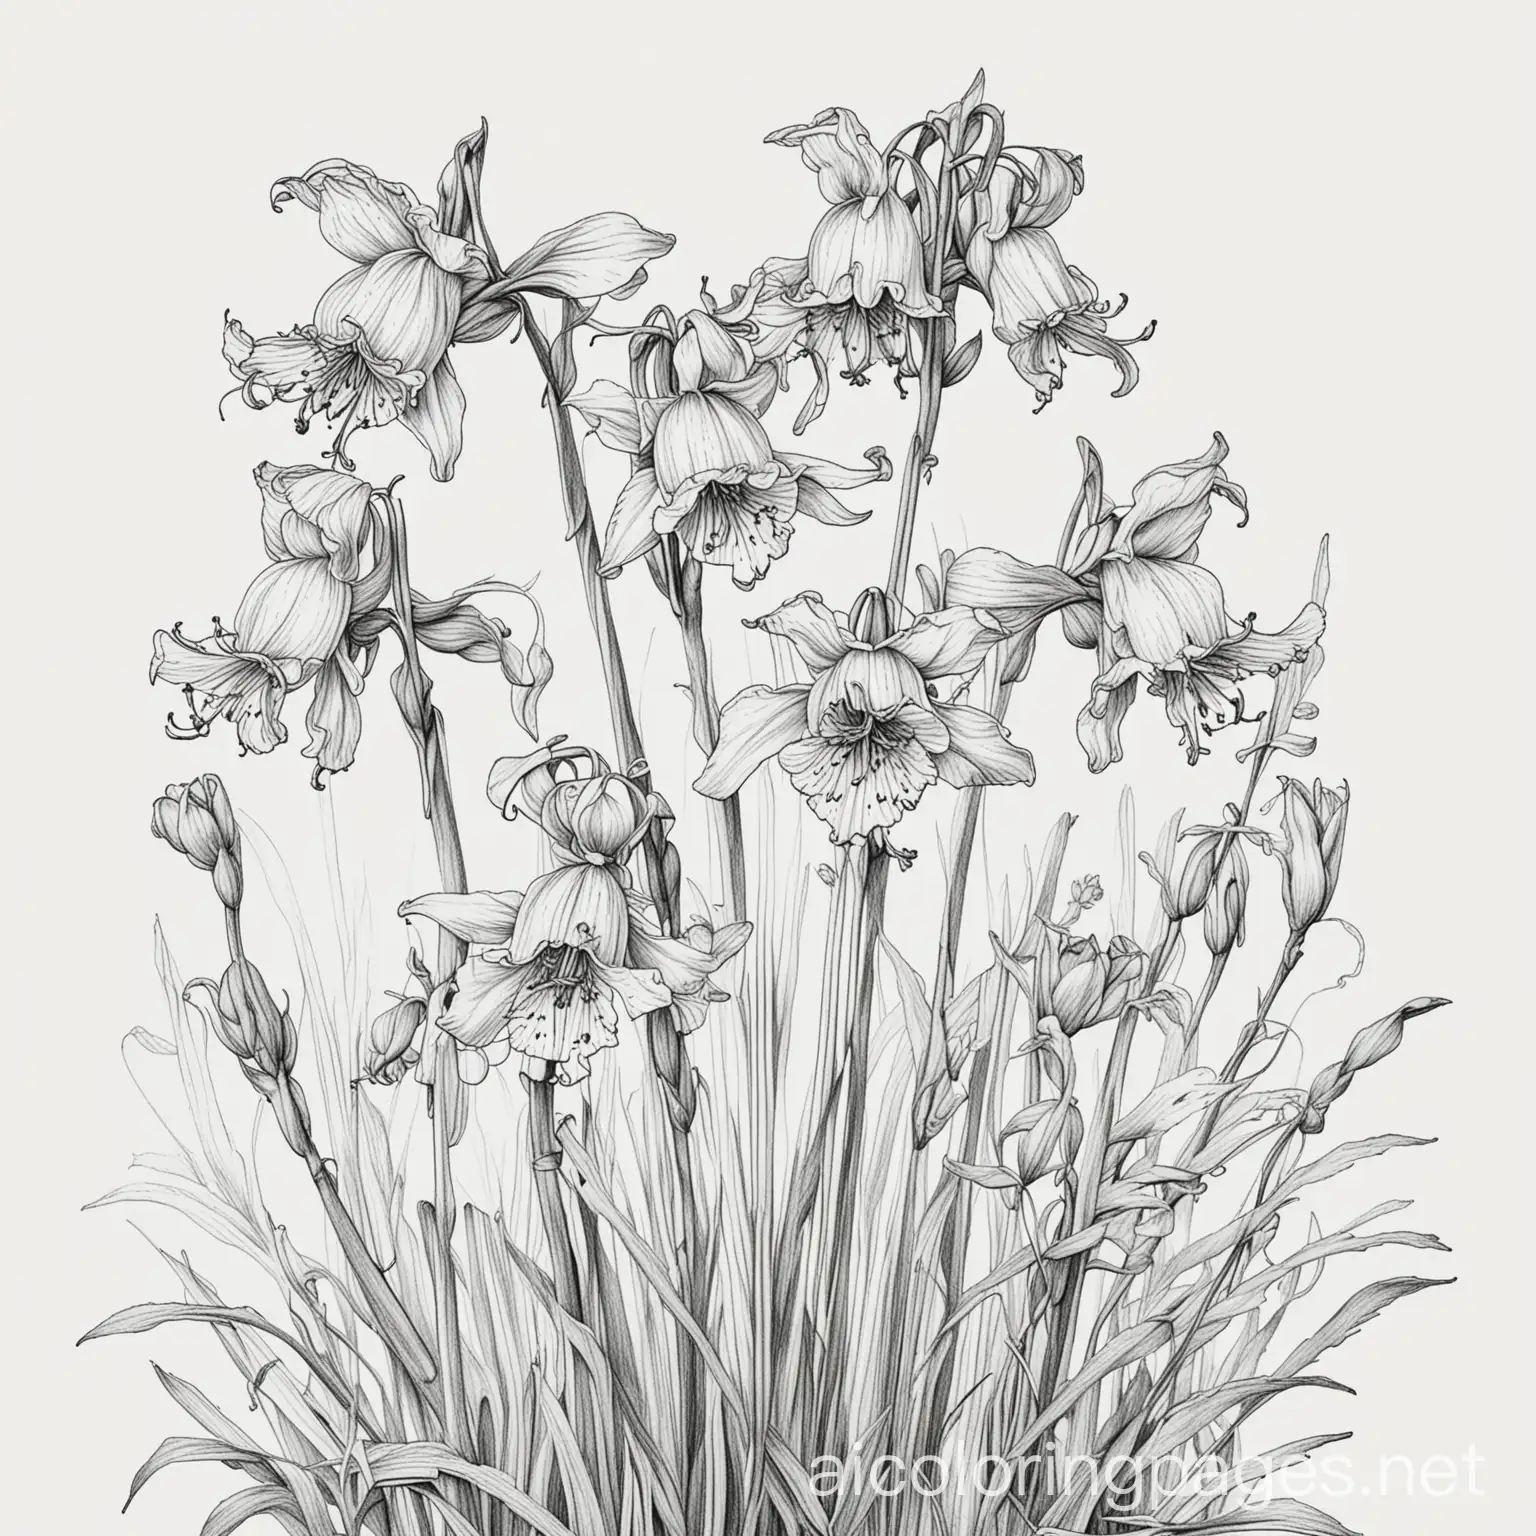 bluebell flowers, Coloring Page, black and white, line art, white background, Simplicity, Ample White Space. The background of the coloring page is plain white to make it easy for young children to color within the lines. The outlines of all the subjects are easy to distinguish, making it simple for kids to color without too much difficulty